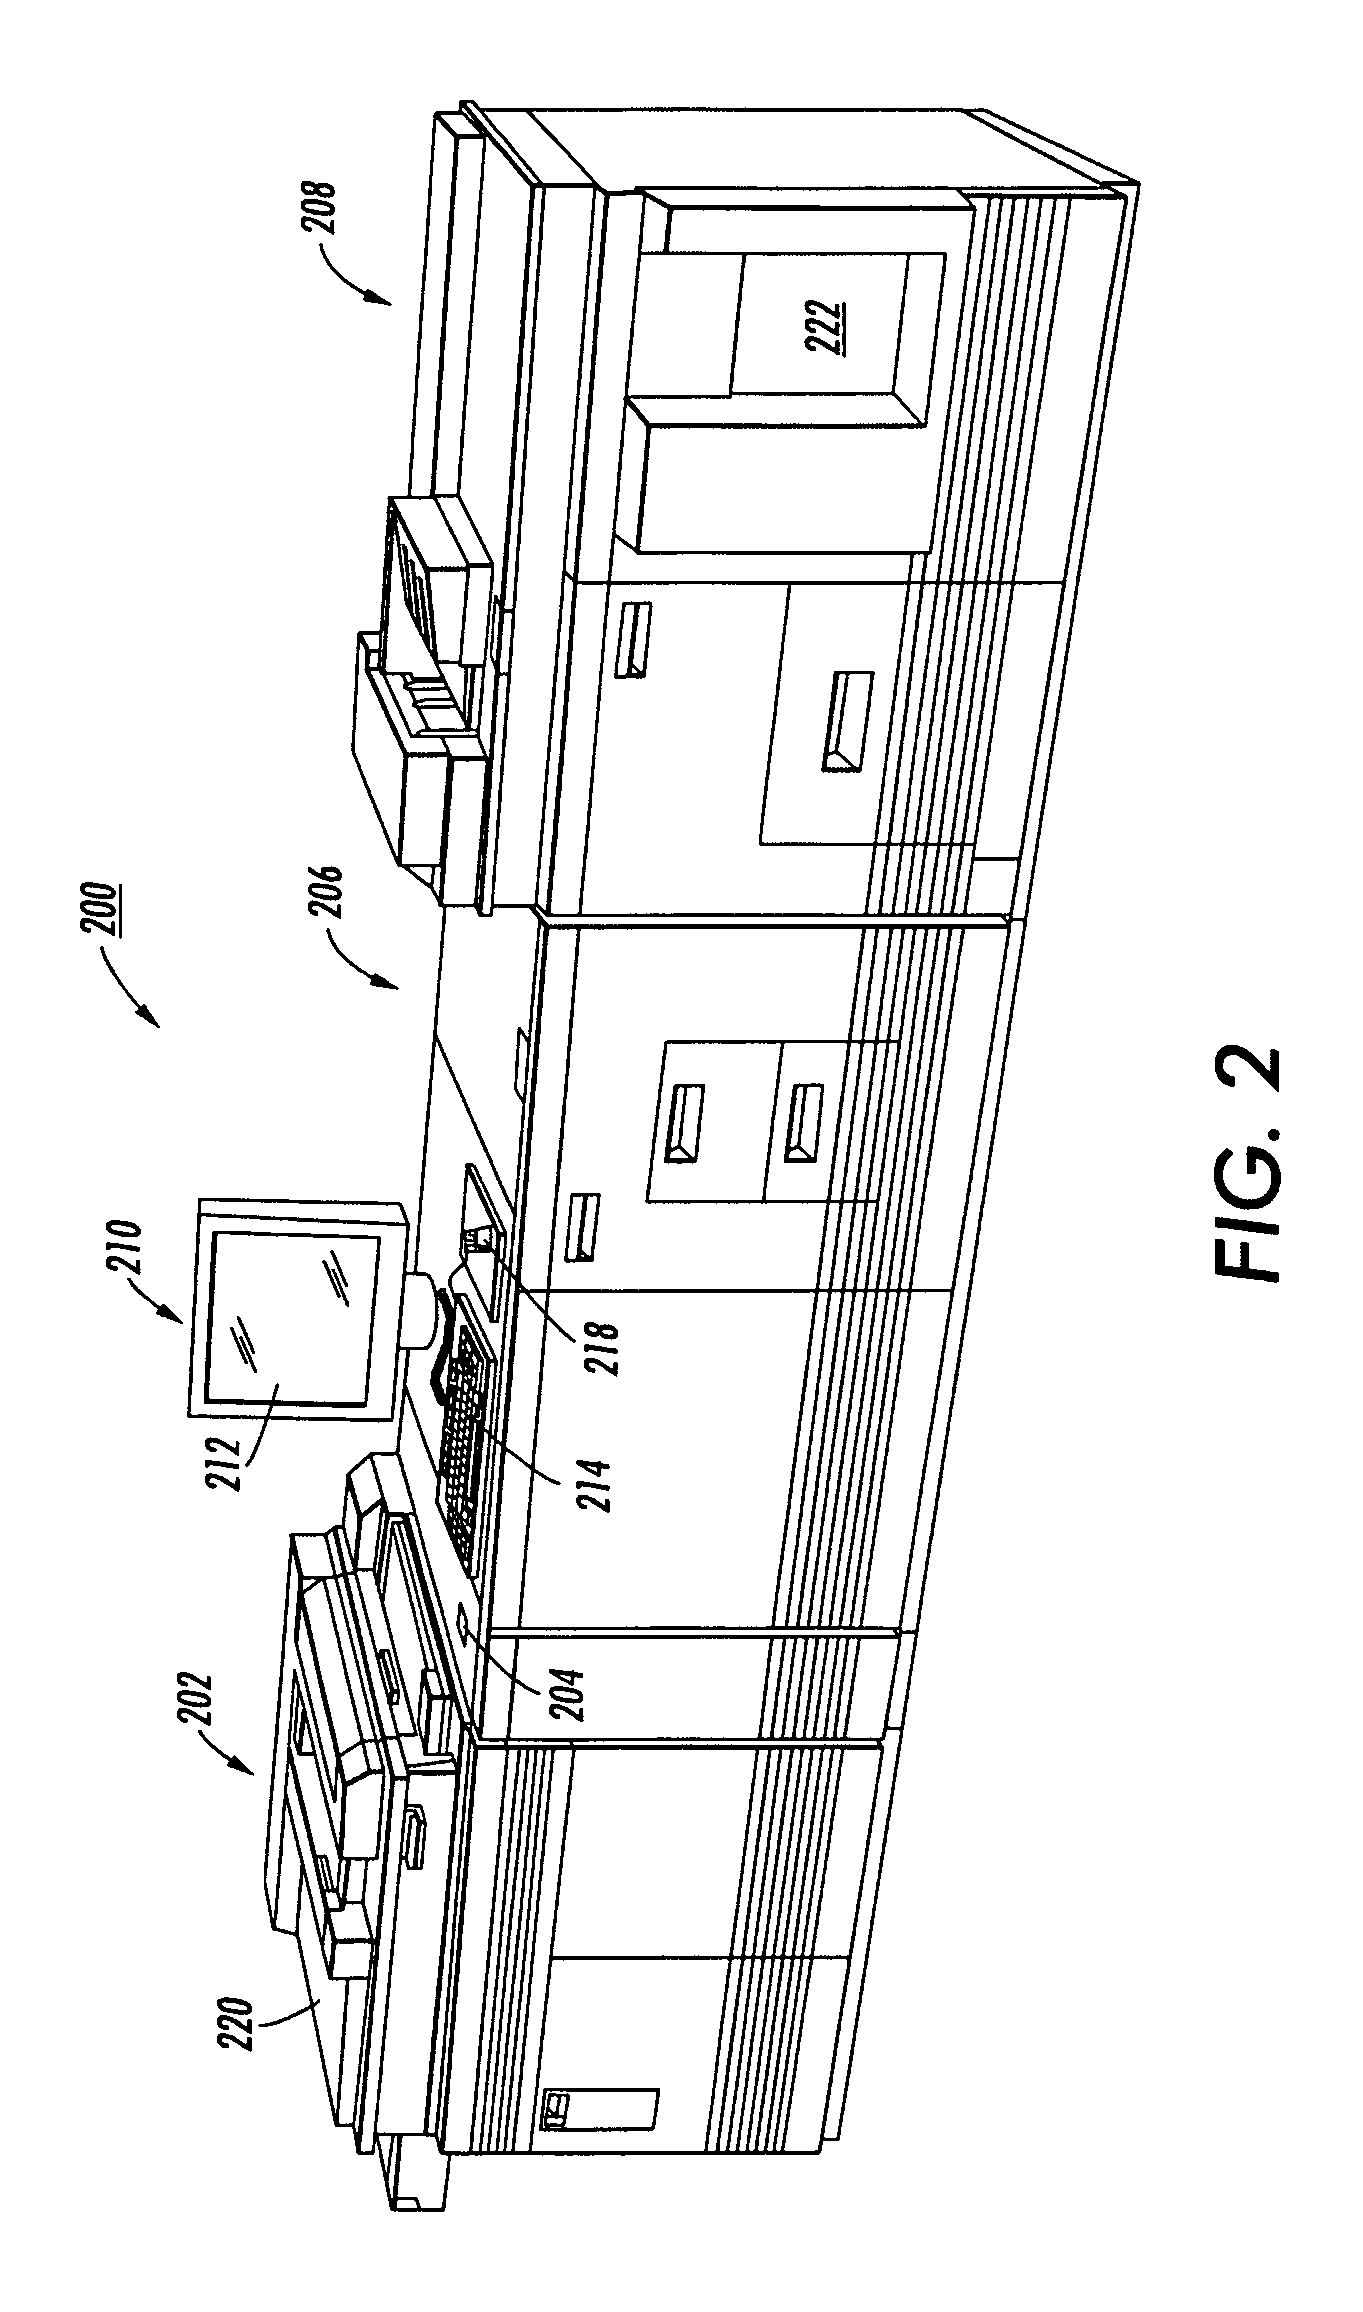 Fingerprint scan order sequence to configure a print system device